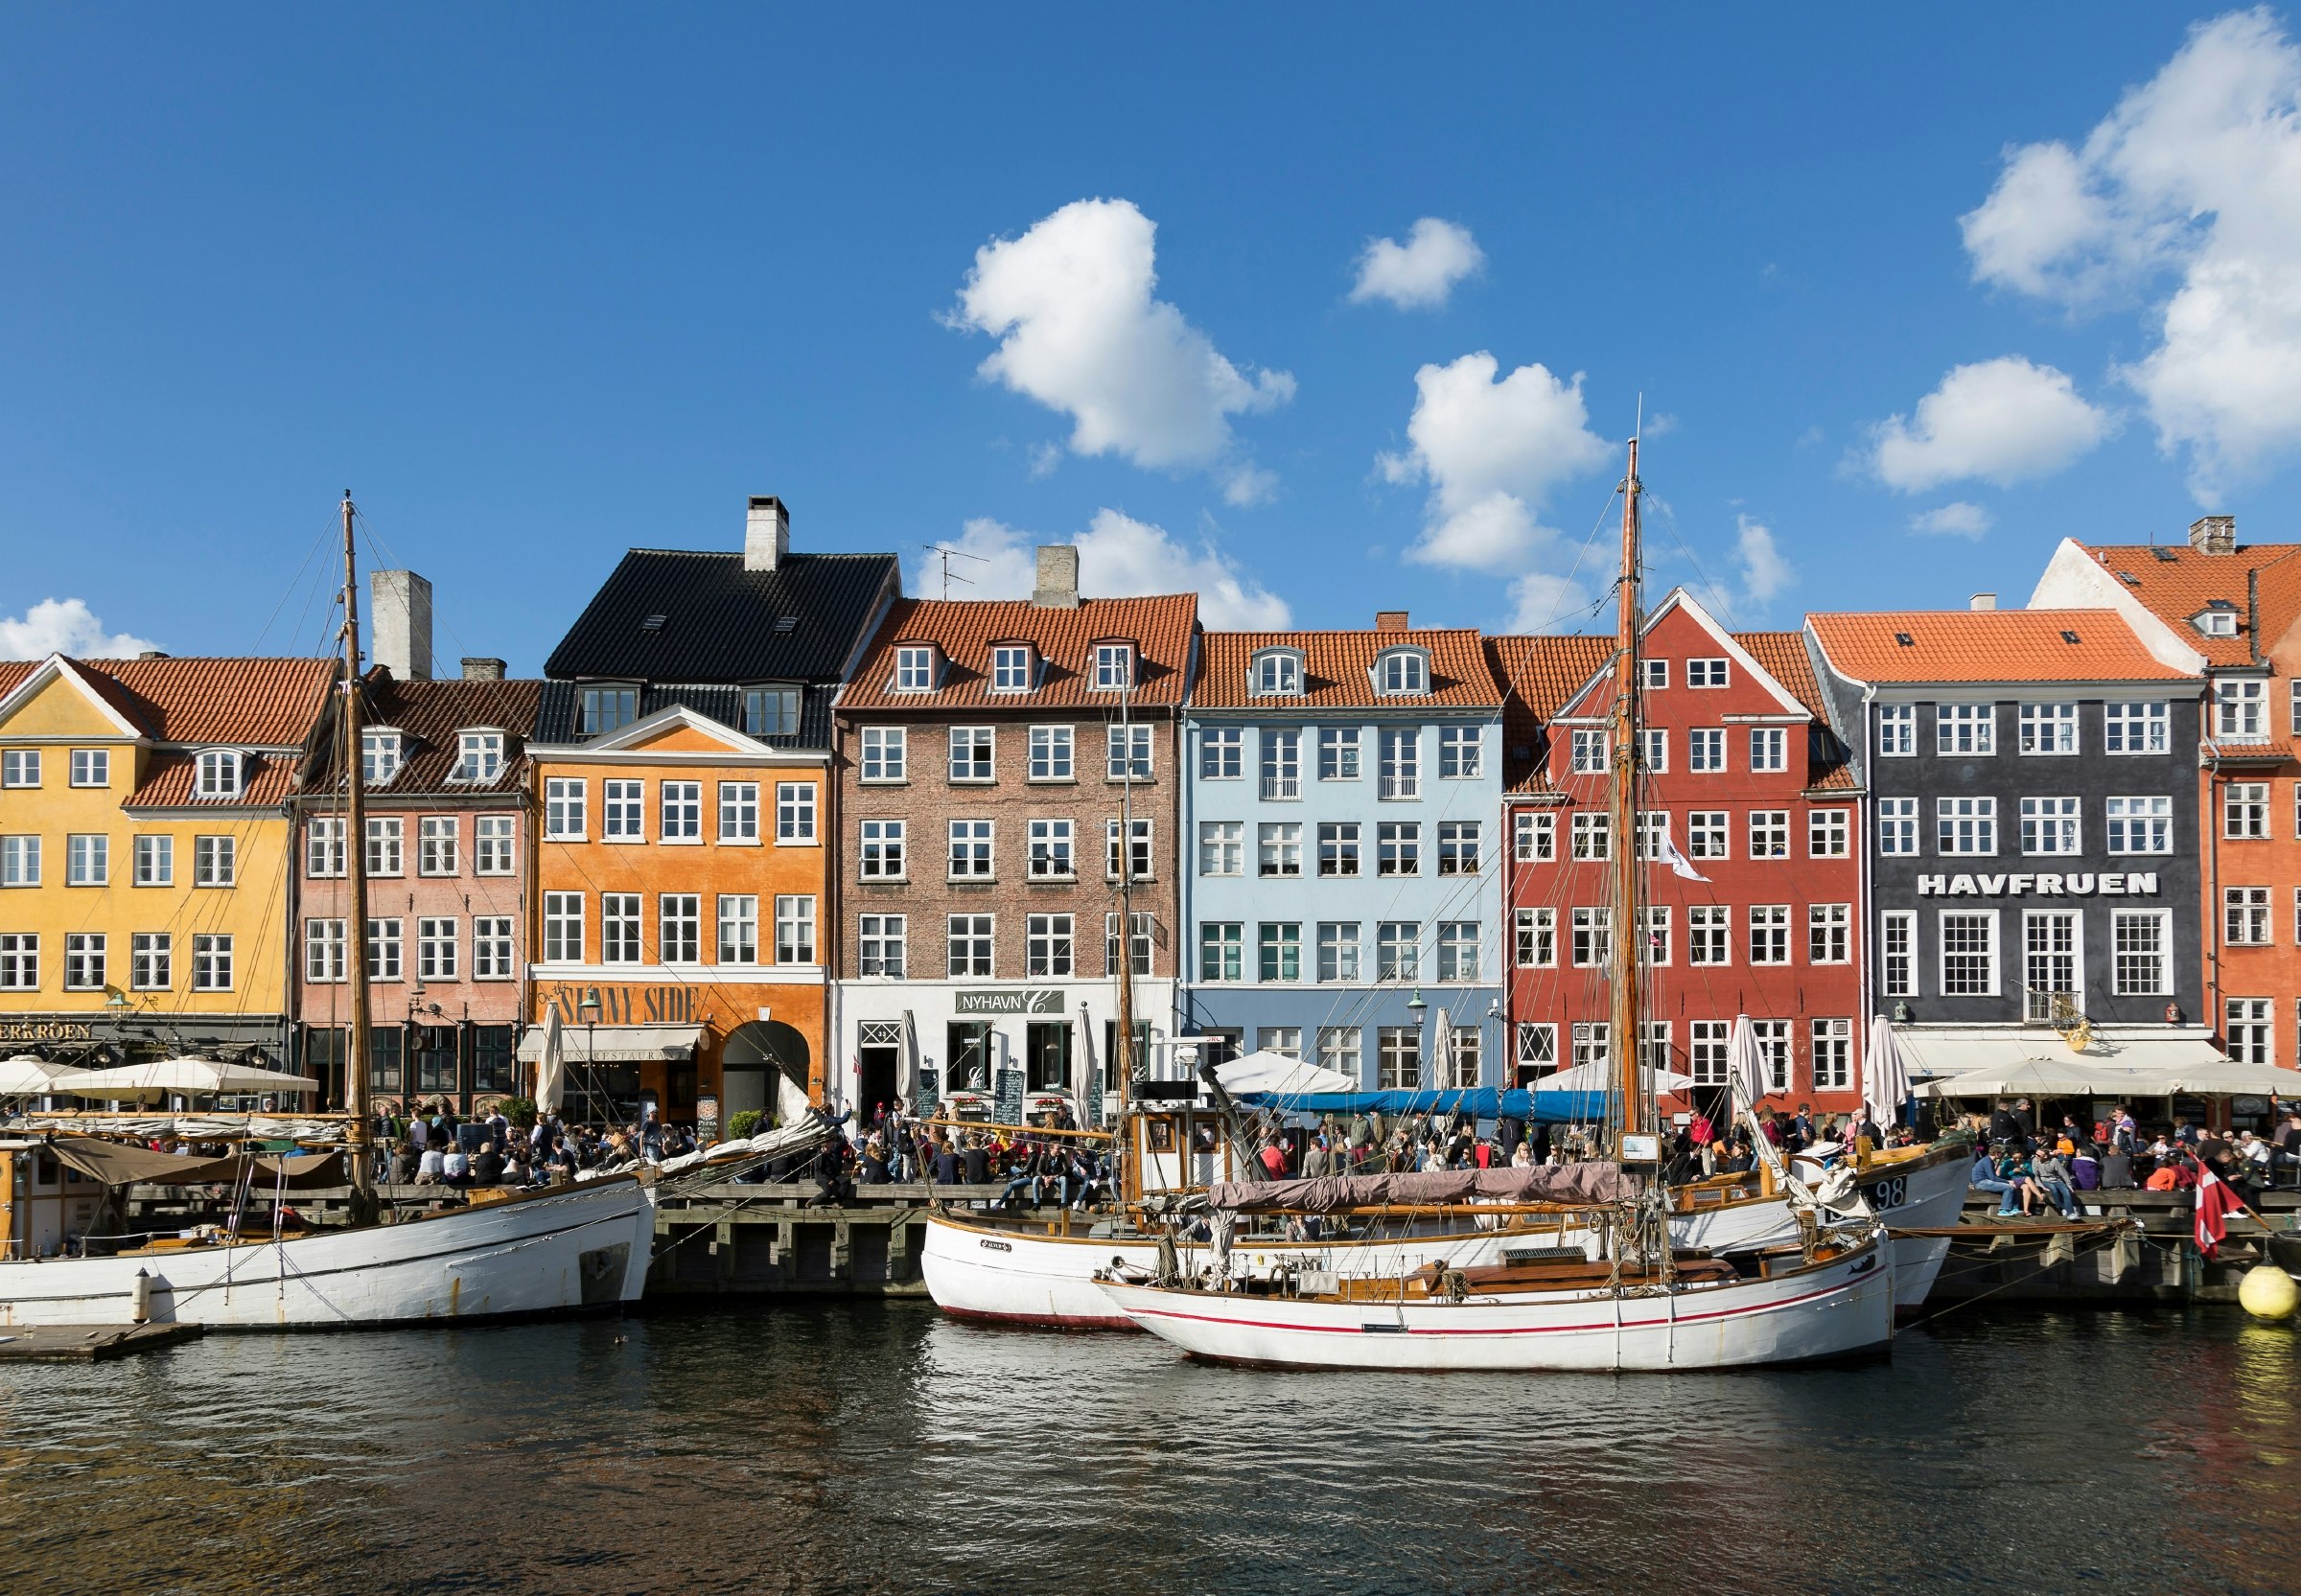 Boats in front of brightly colored building facades on Nyhavn canal in Copenhagen.